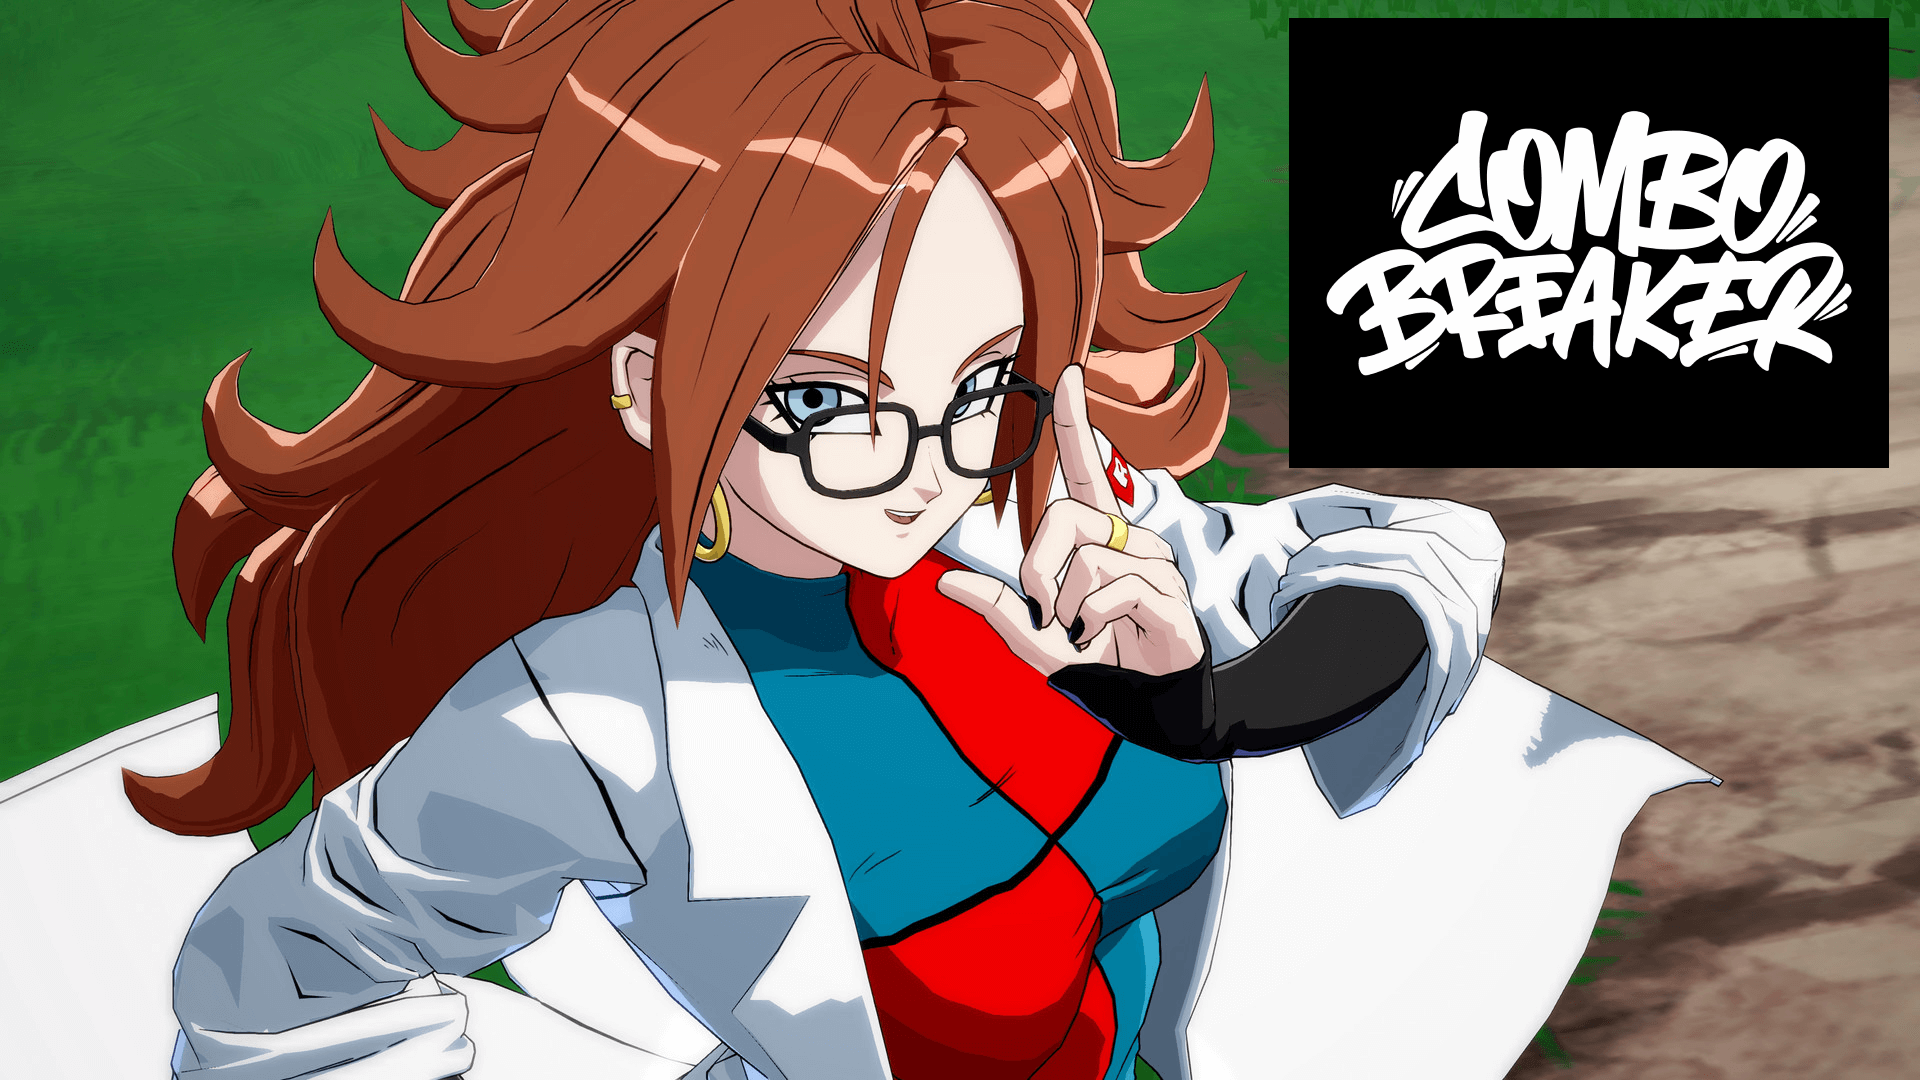 Combo Breaker Considers banning Android 21 LC. Should They?